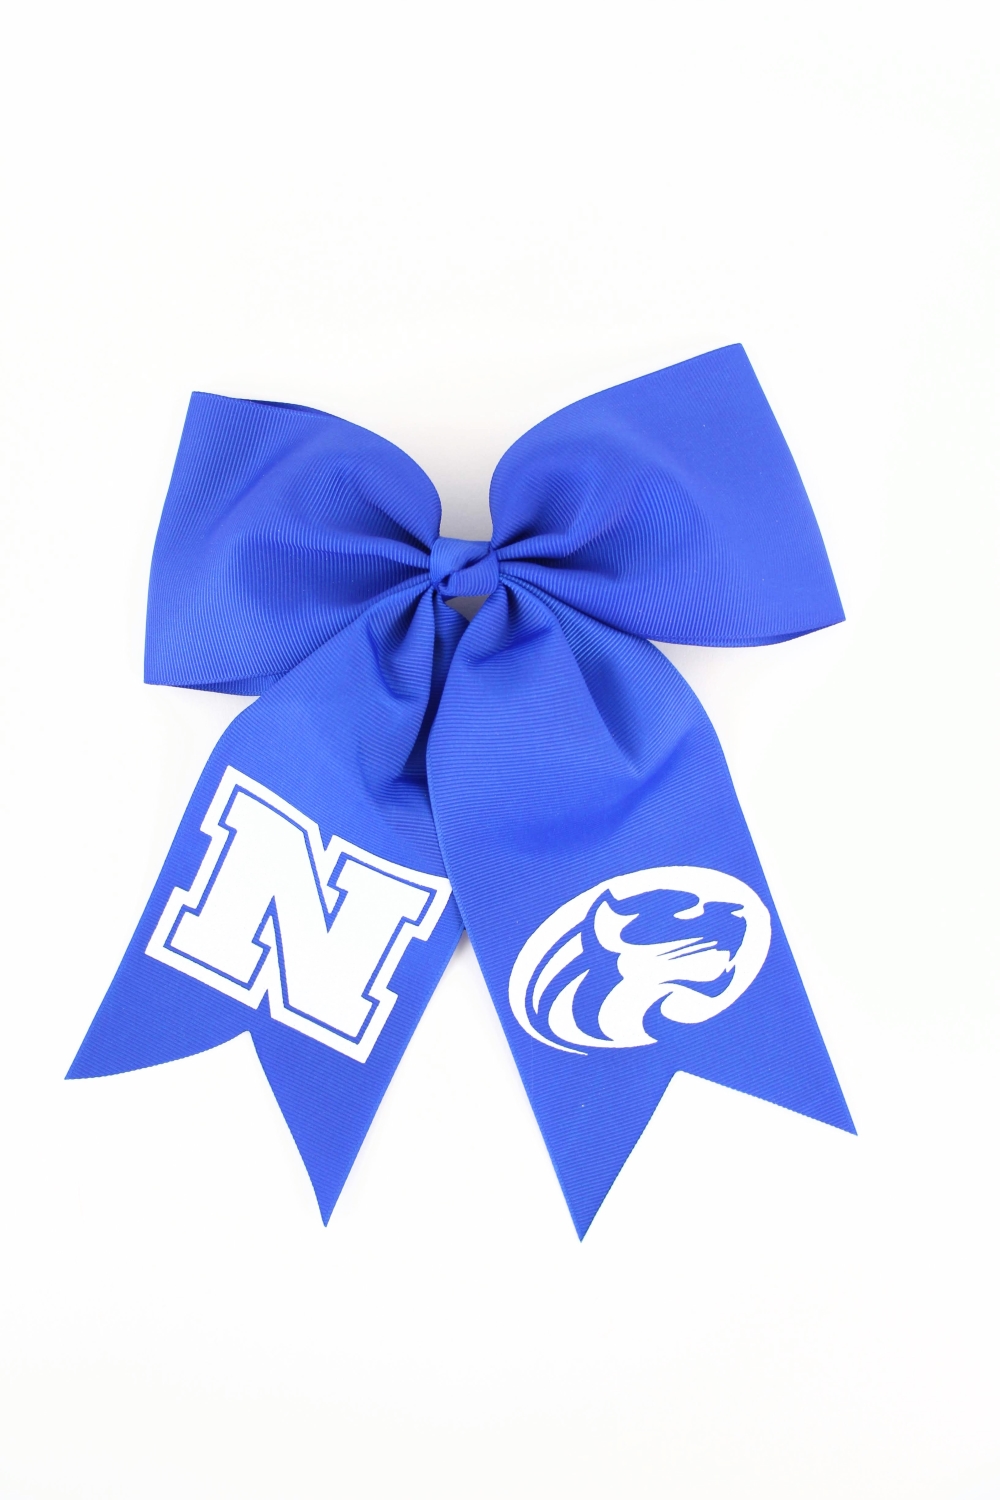 Showing your school spirit is easy with a DIY School Spirit Cheer Bow with your school's logo or mascot. Click here to see how to make your own custom cheer bow with Polka Dotted Blue Jay.